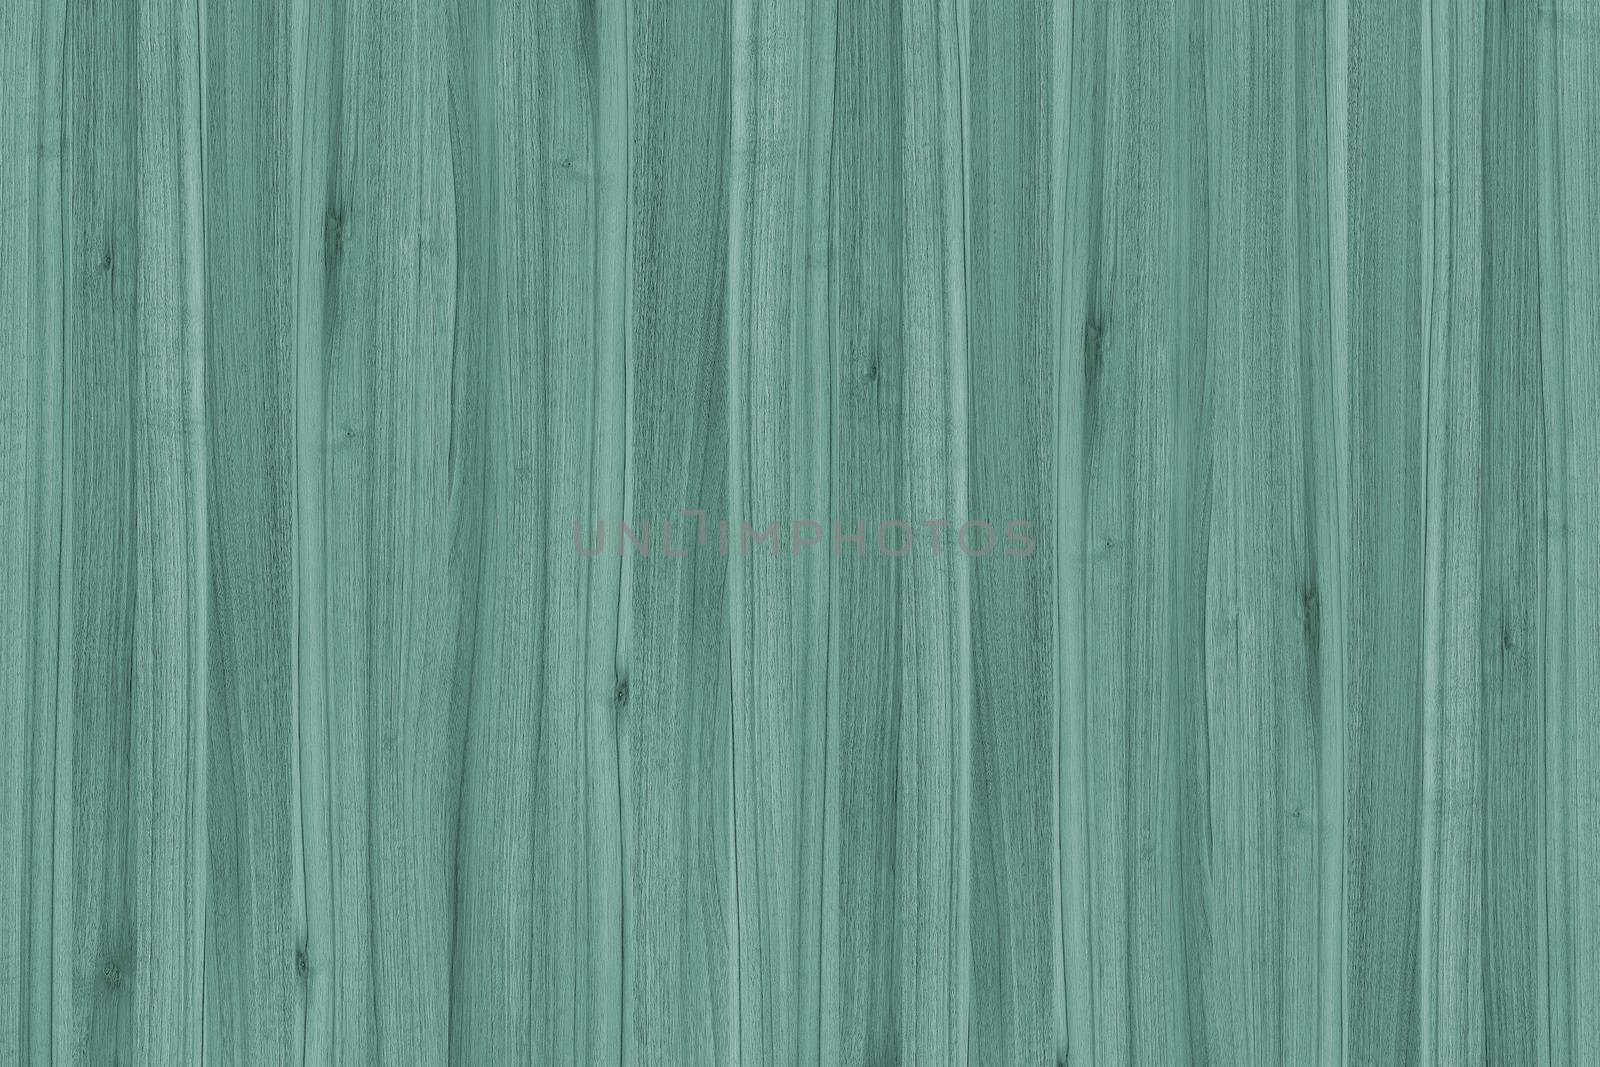 Wooden texture blue background. Top view. Copy space